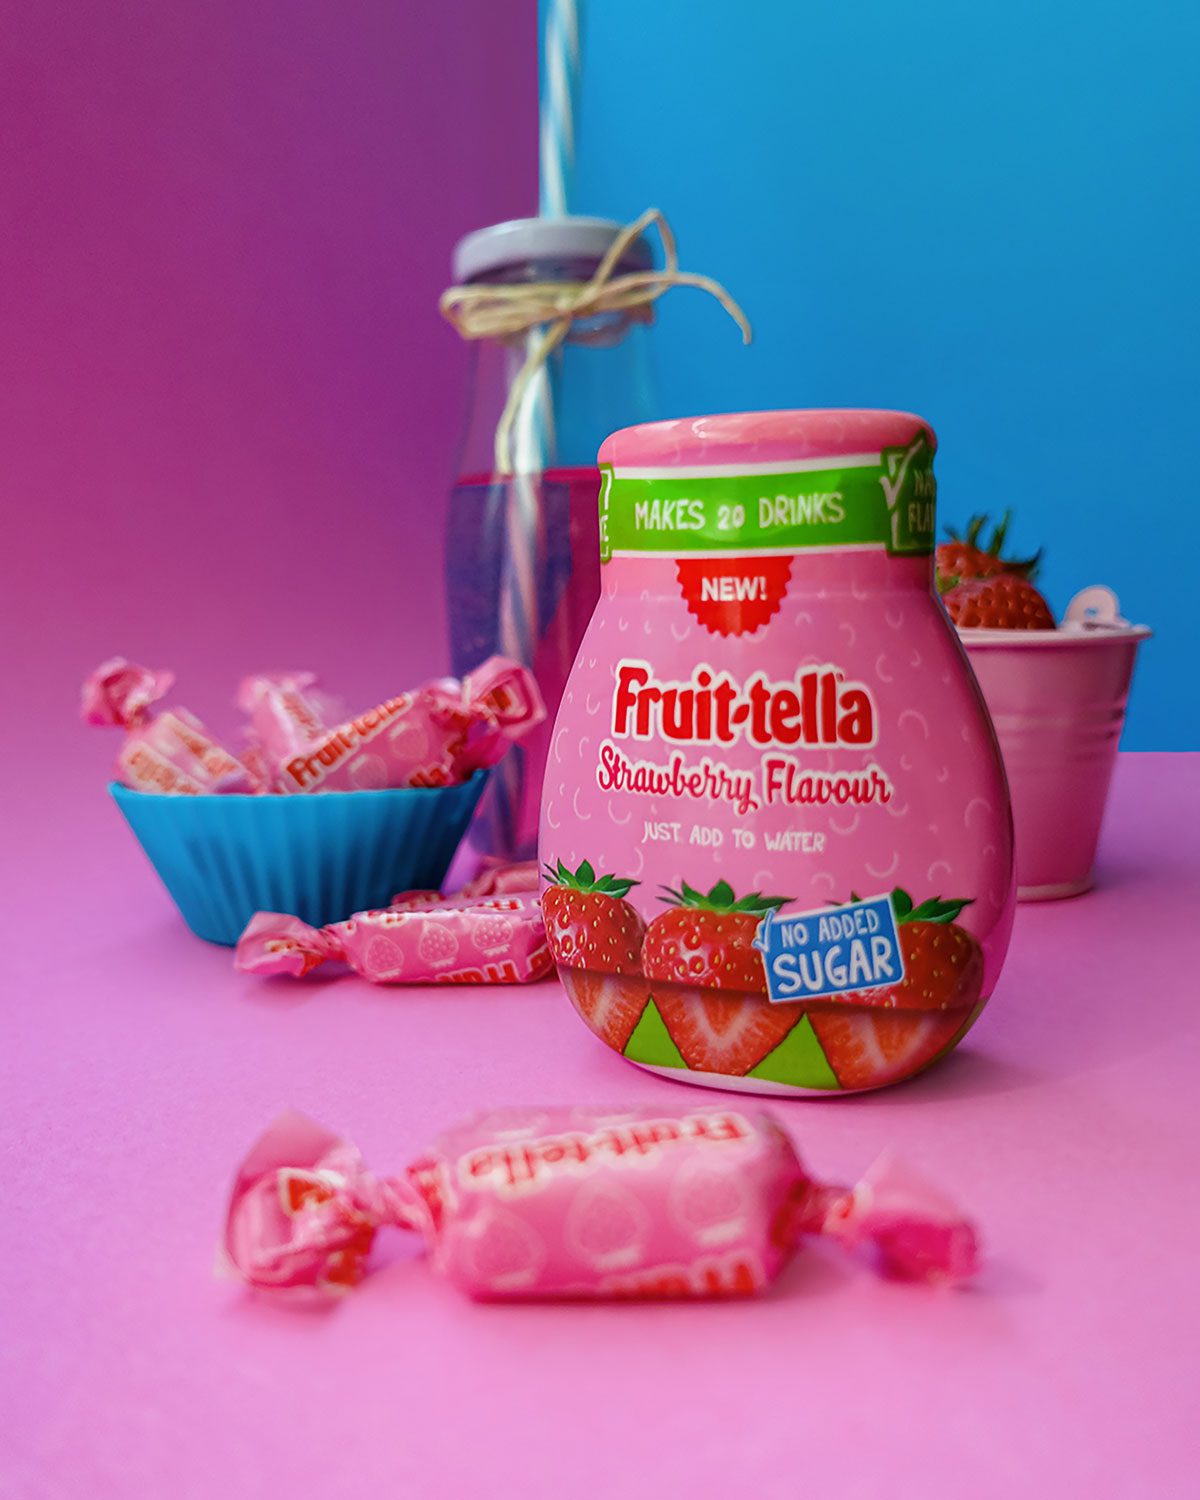 The Strawberry flavour Fruittella Water Enhancer from Manchester Drinks.